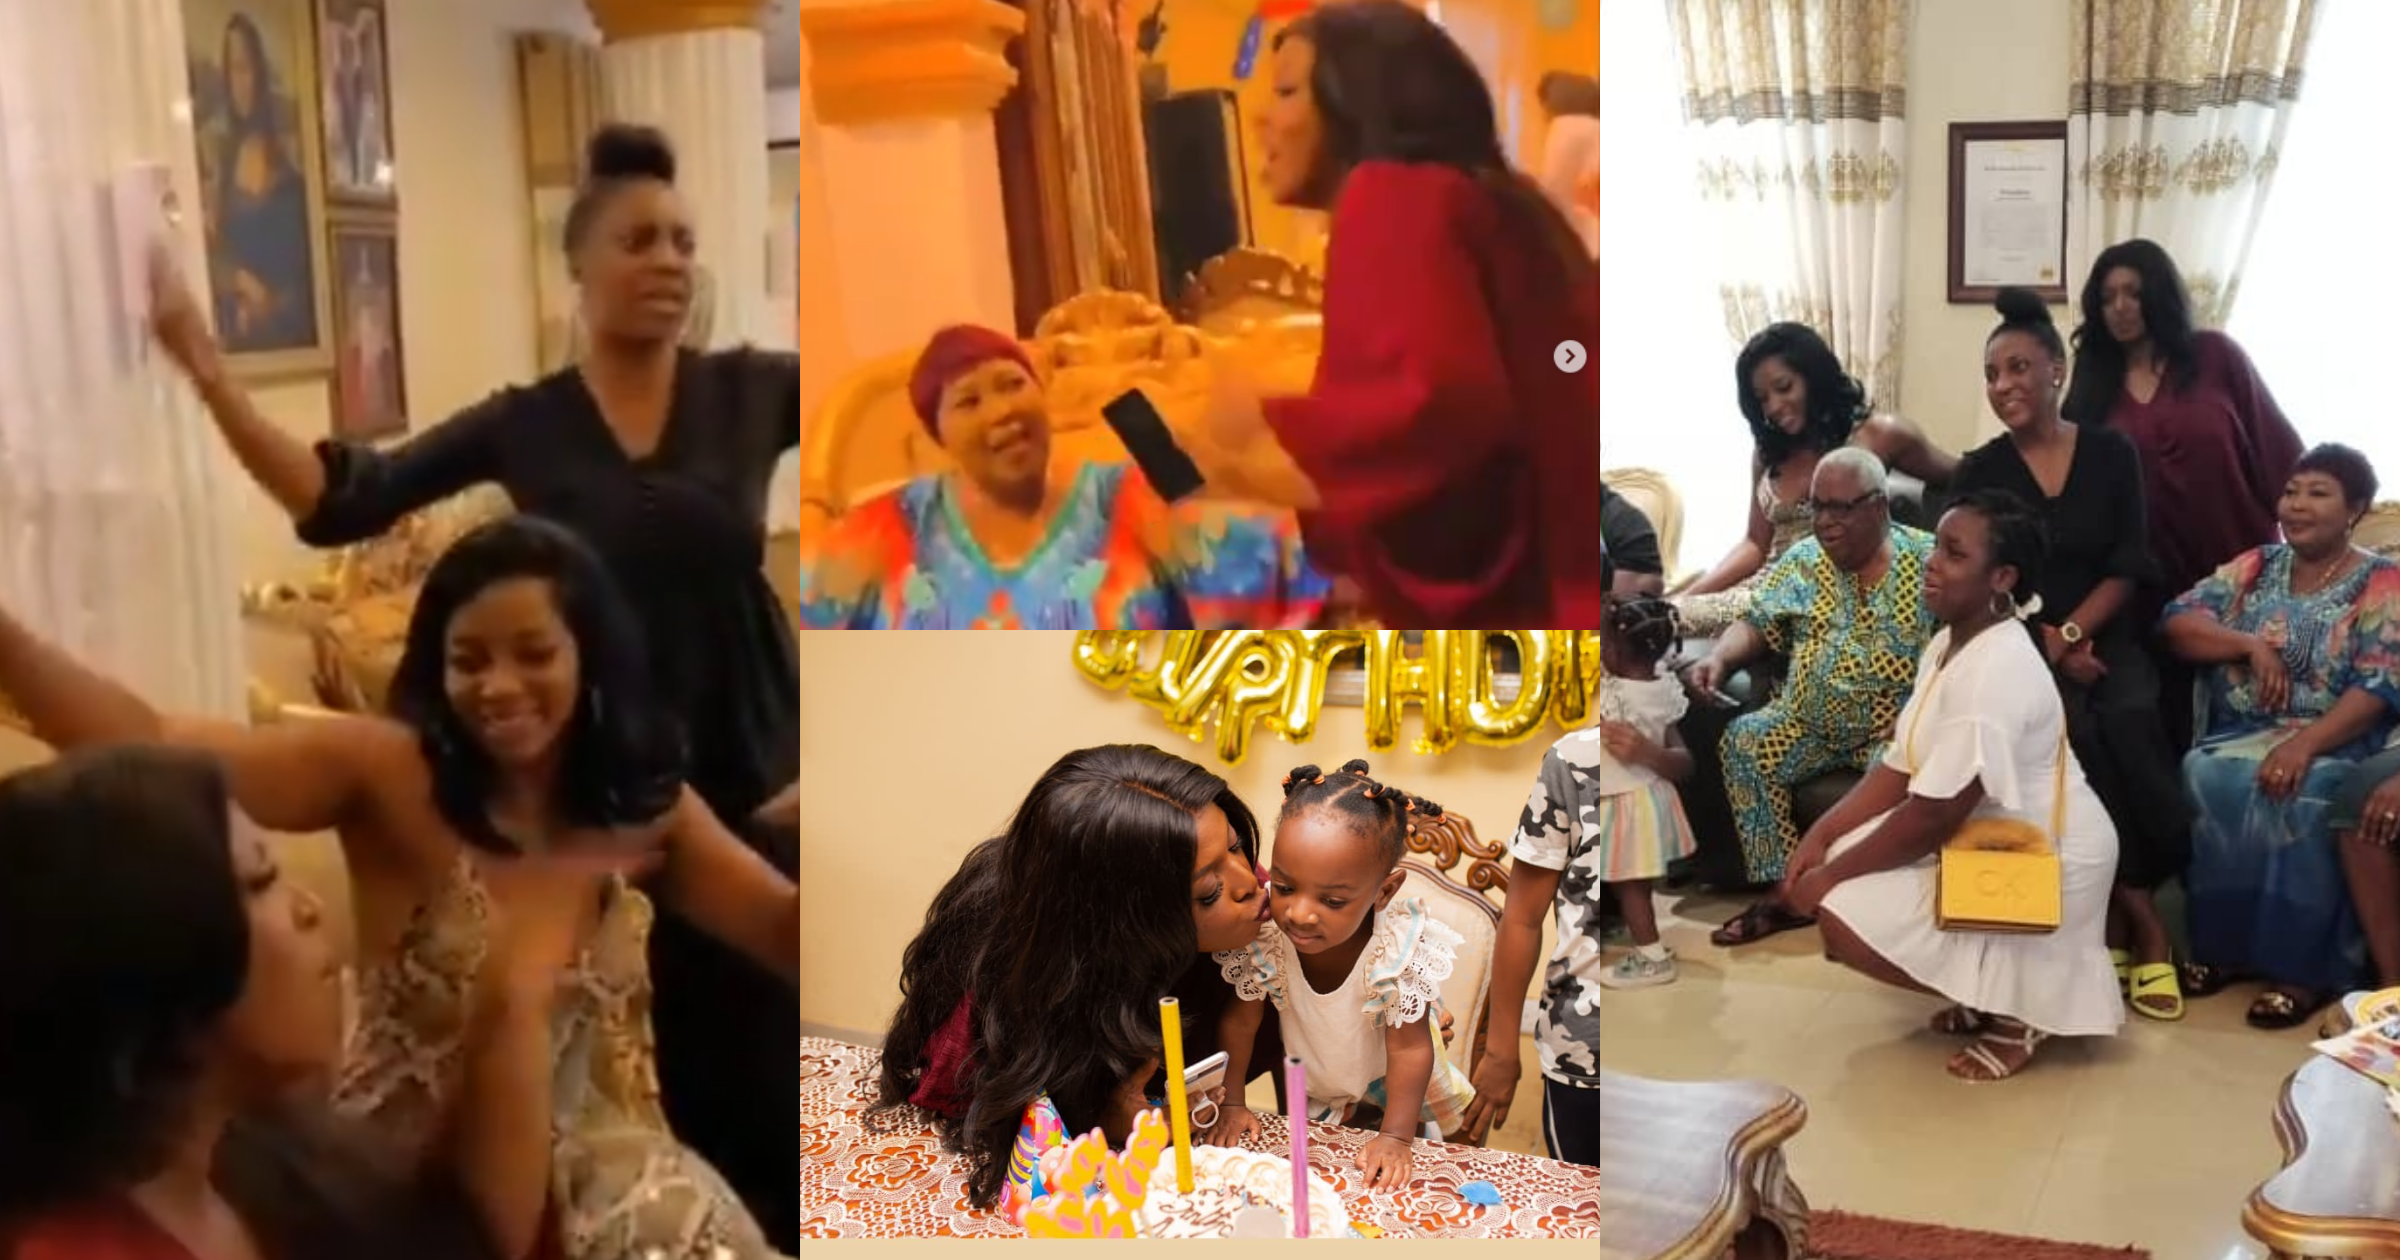 Awesome family - Yvonne Okoro flaunts parents & siblings at family party; videos warm hearts